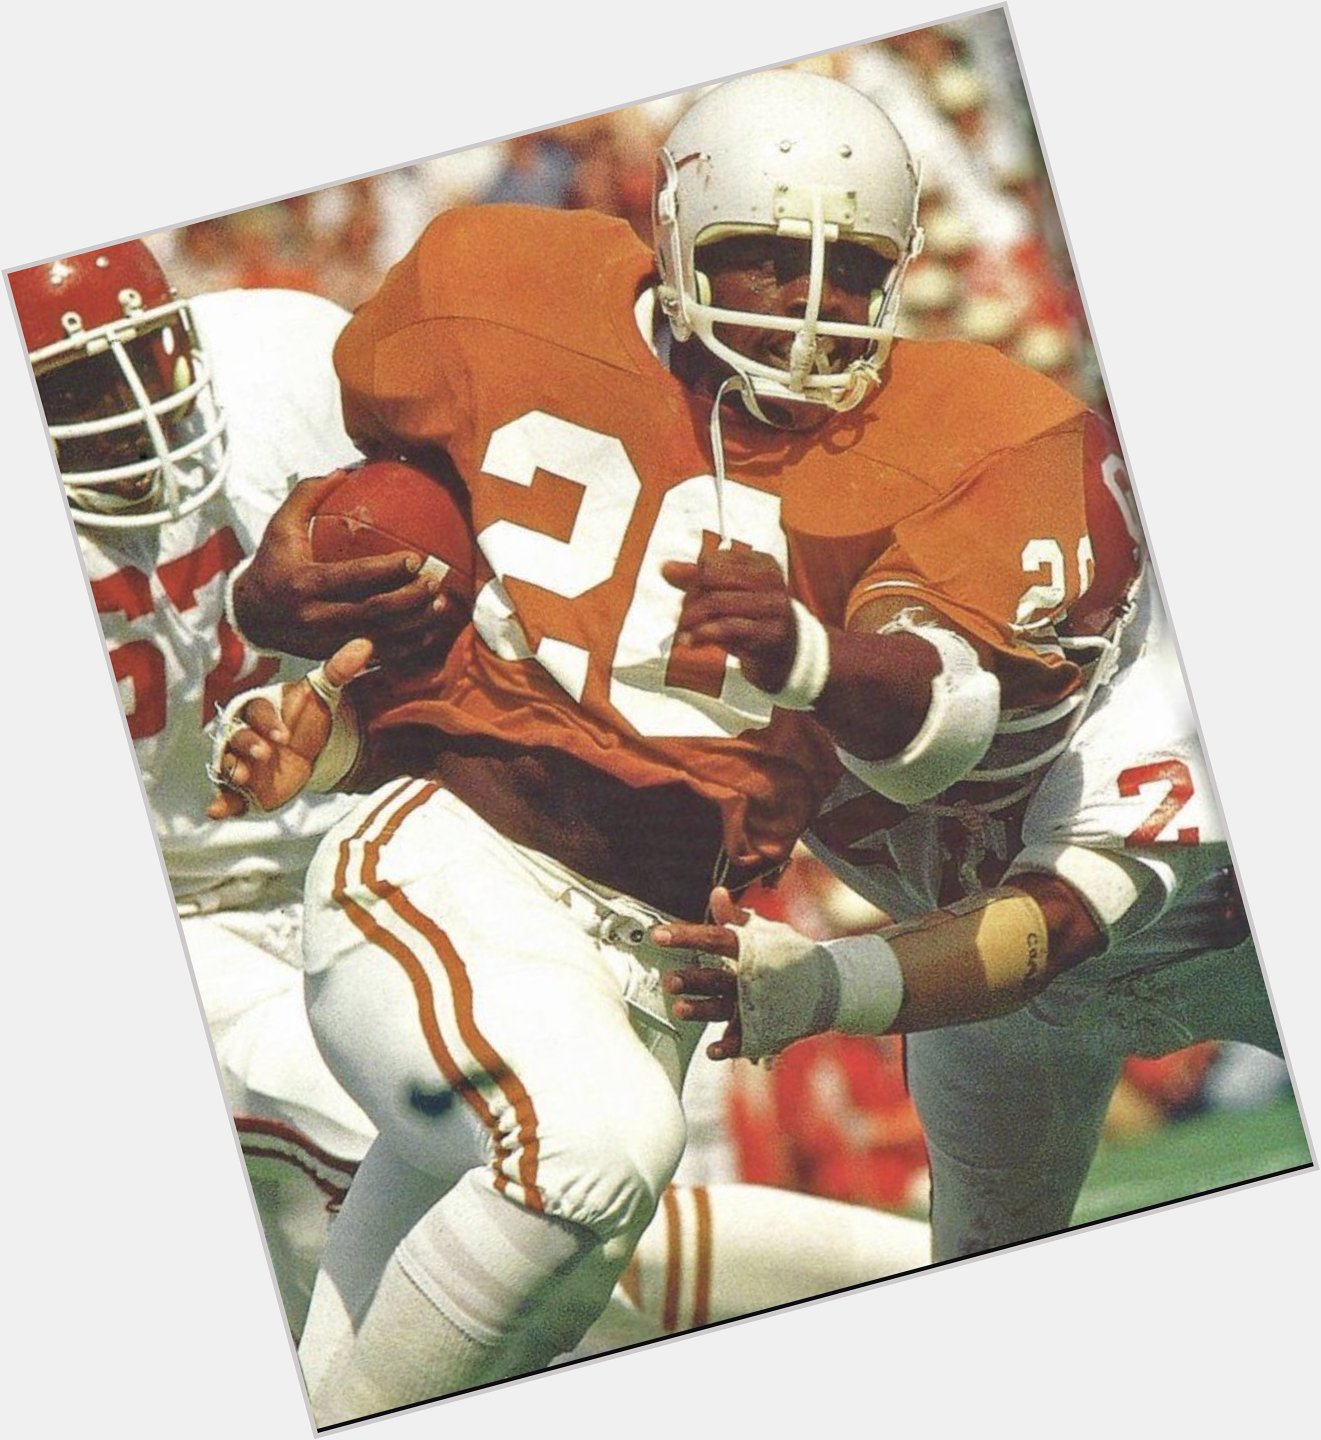 Happy Birthday Earl Campbell !! One of the greatest players ever to wear a Texas Longhorn jersey!    